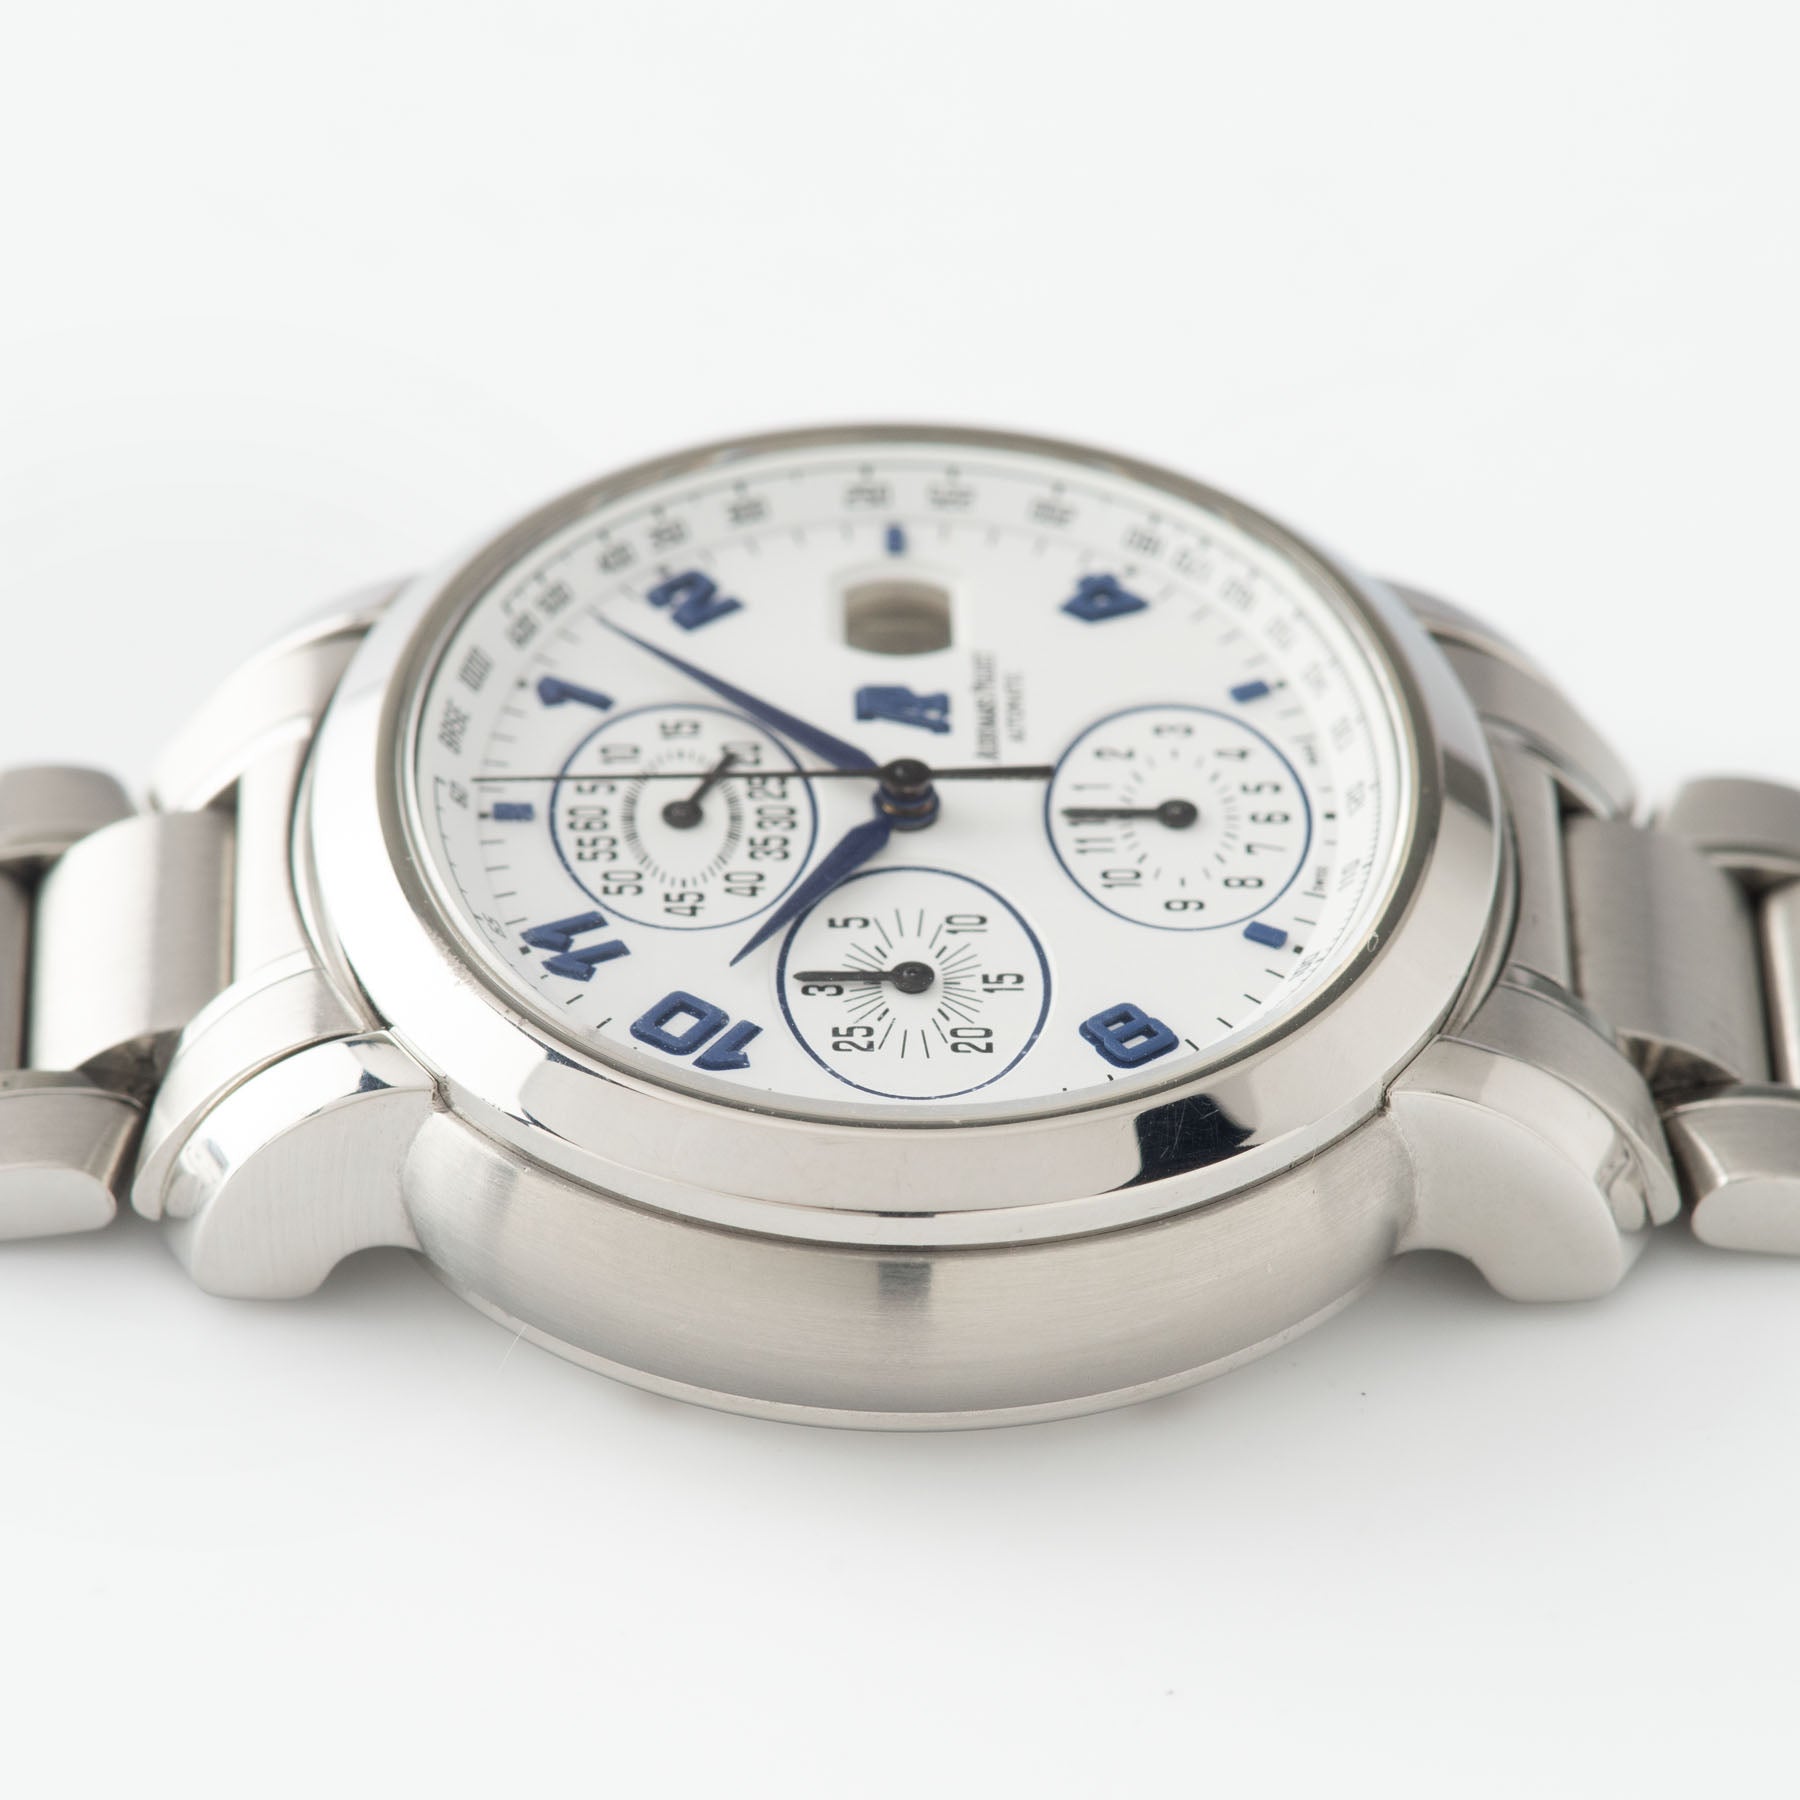 Audemars Piguet Millenary Chronograph with Papers